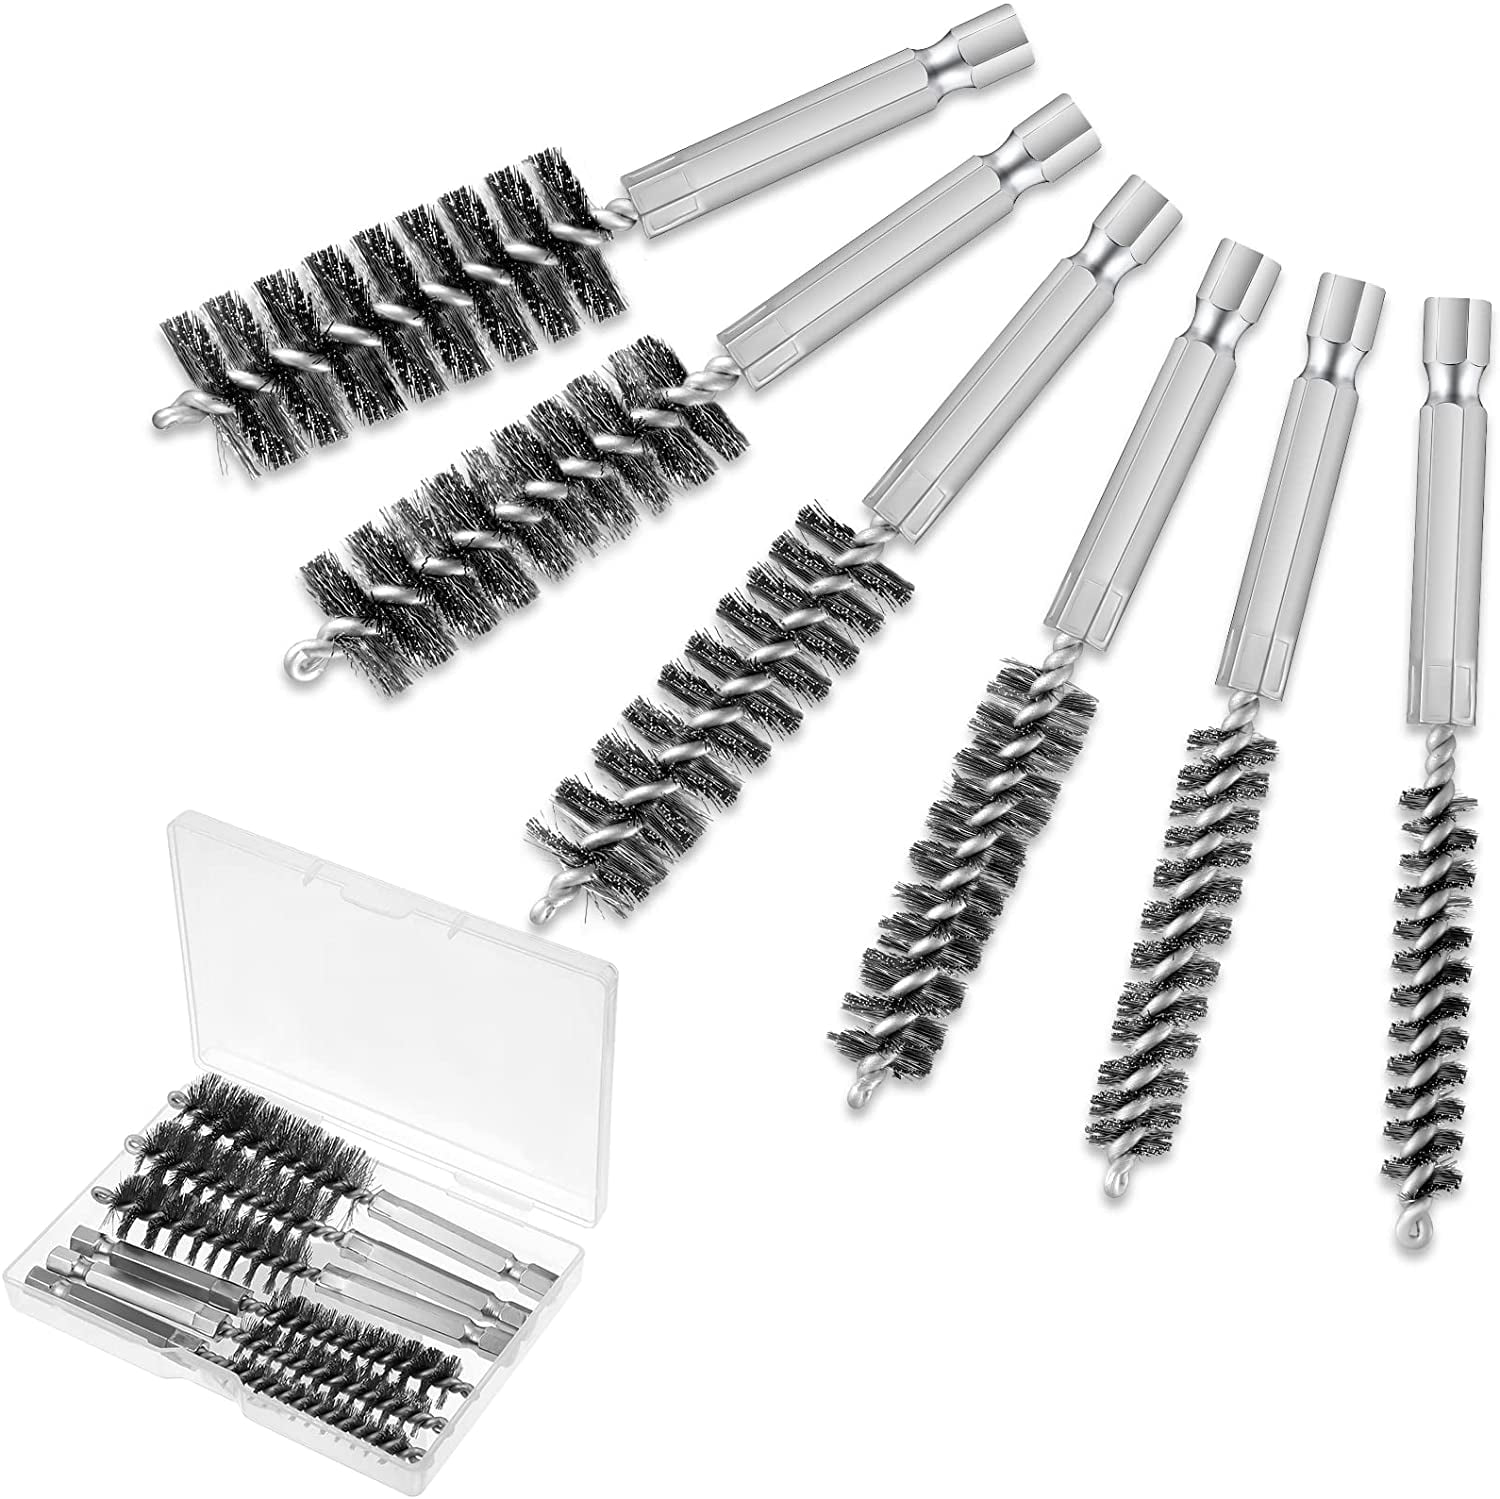 BUY 20-PC ASSORTED SIZES WIRE WHEEL BRUSH DRILL BITS 1-1/4"-2 1/2"